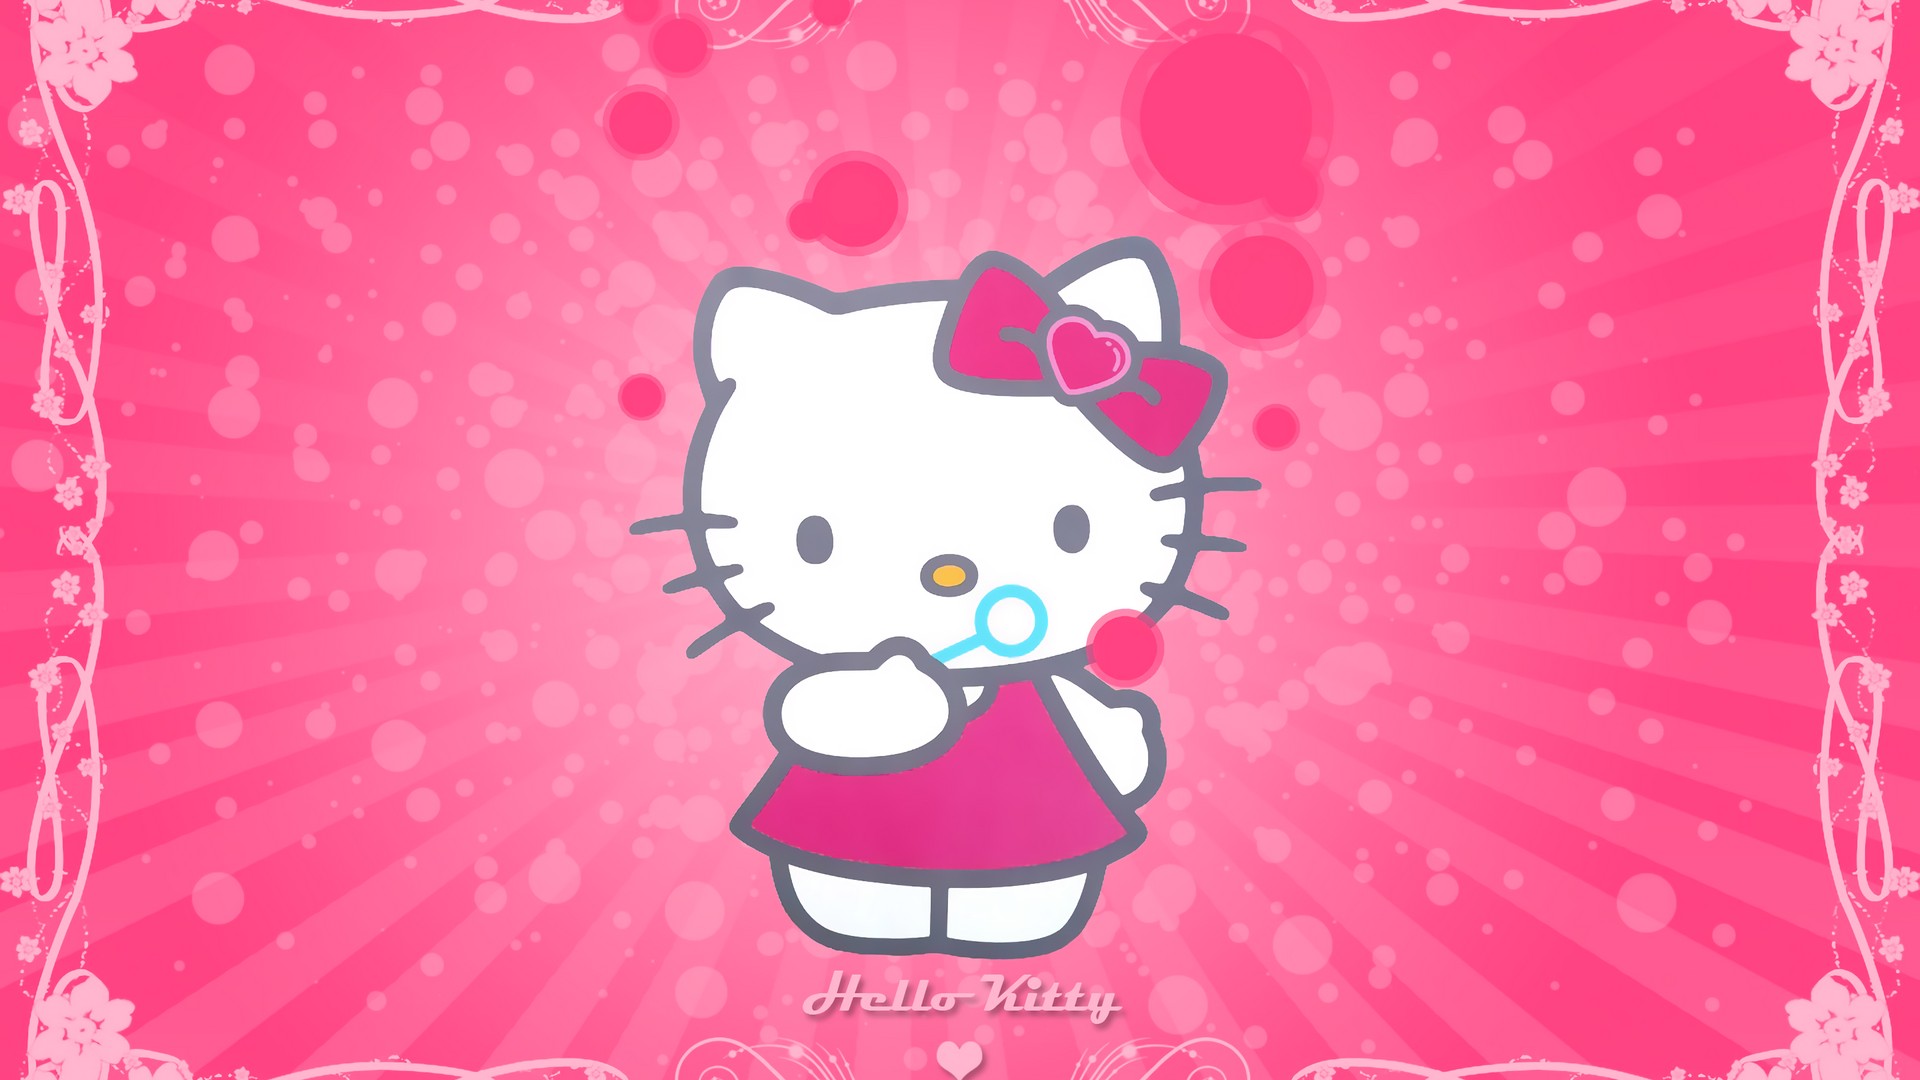 Hello Kitty Pictures Wallpaper HD With Resolution 1920X1080 pixel. You can make this wallpaper for your Desktop Computer Backgrounds, Mac Wallpapers, Android Lock screen or iPhone Screensavers